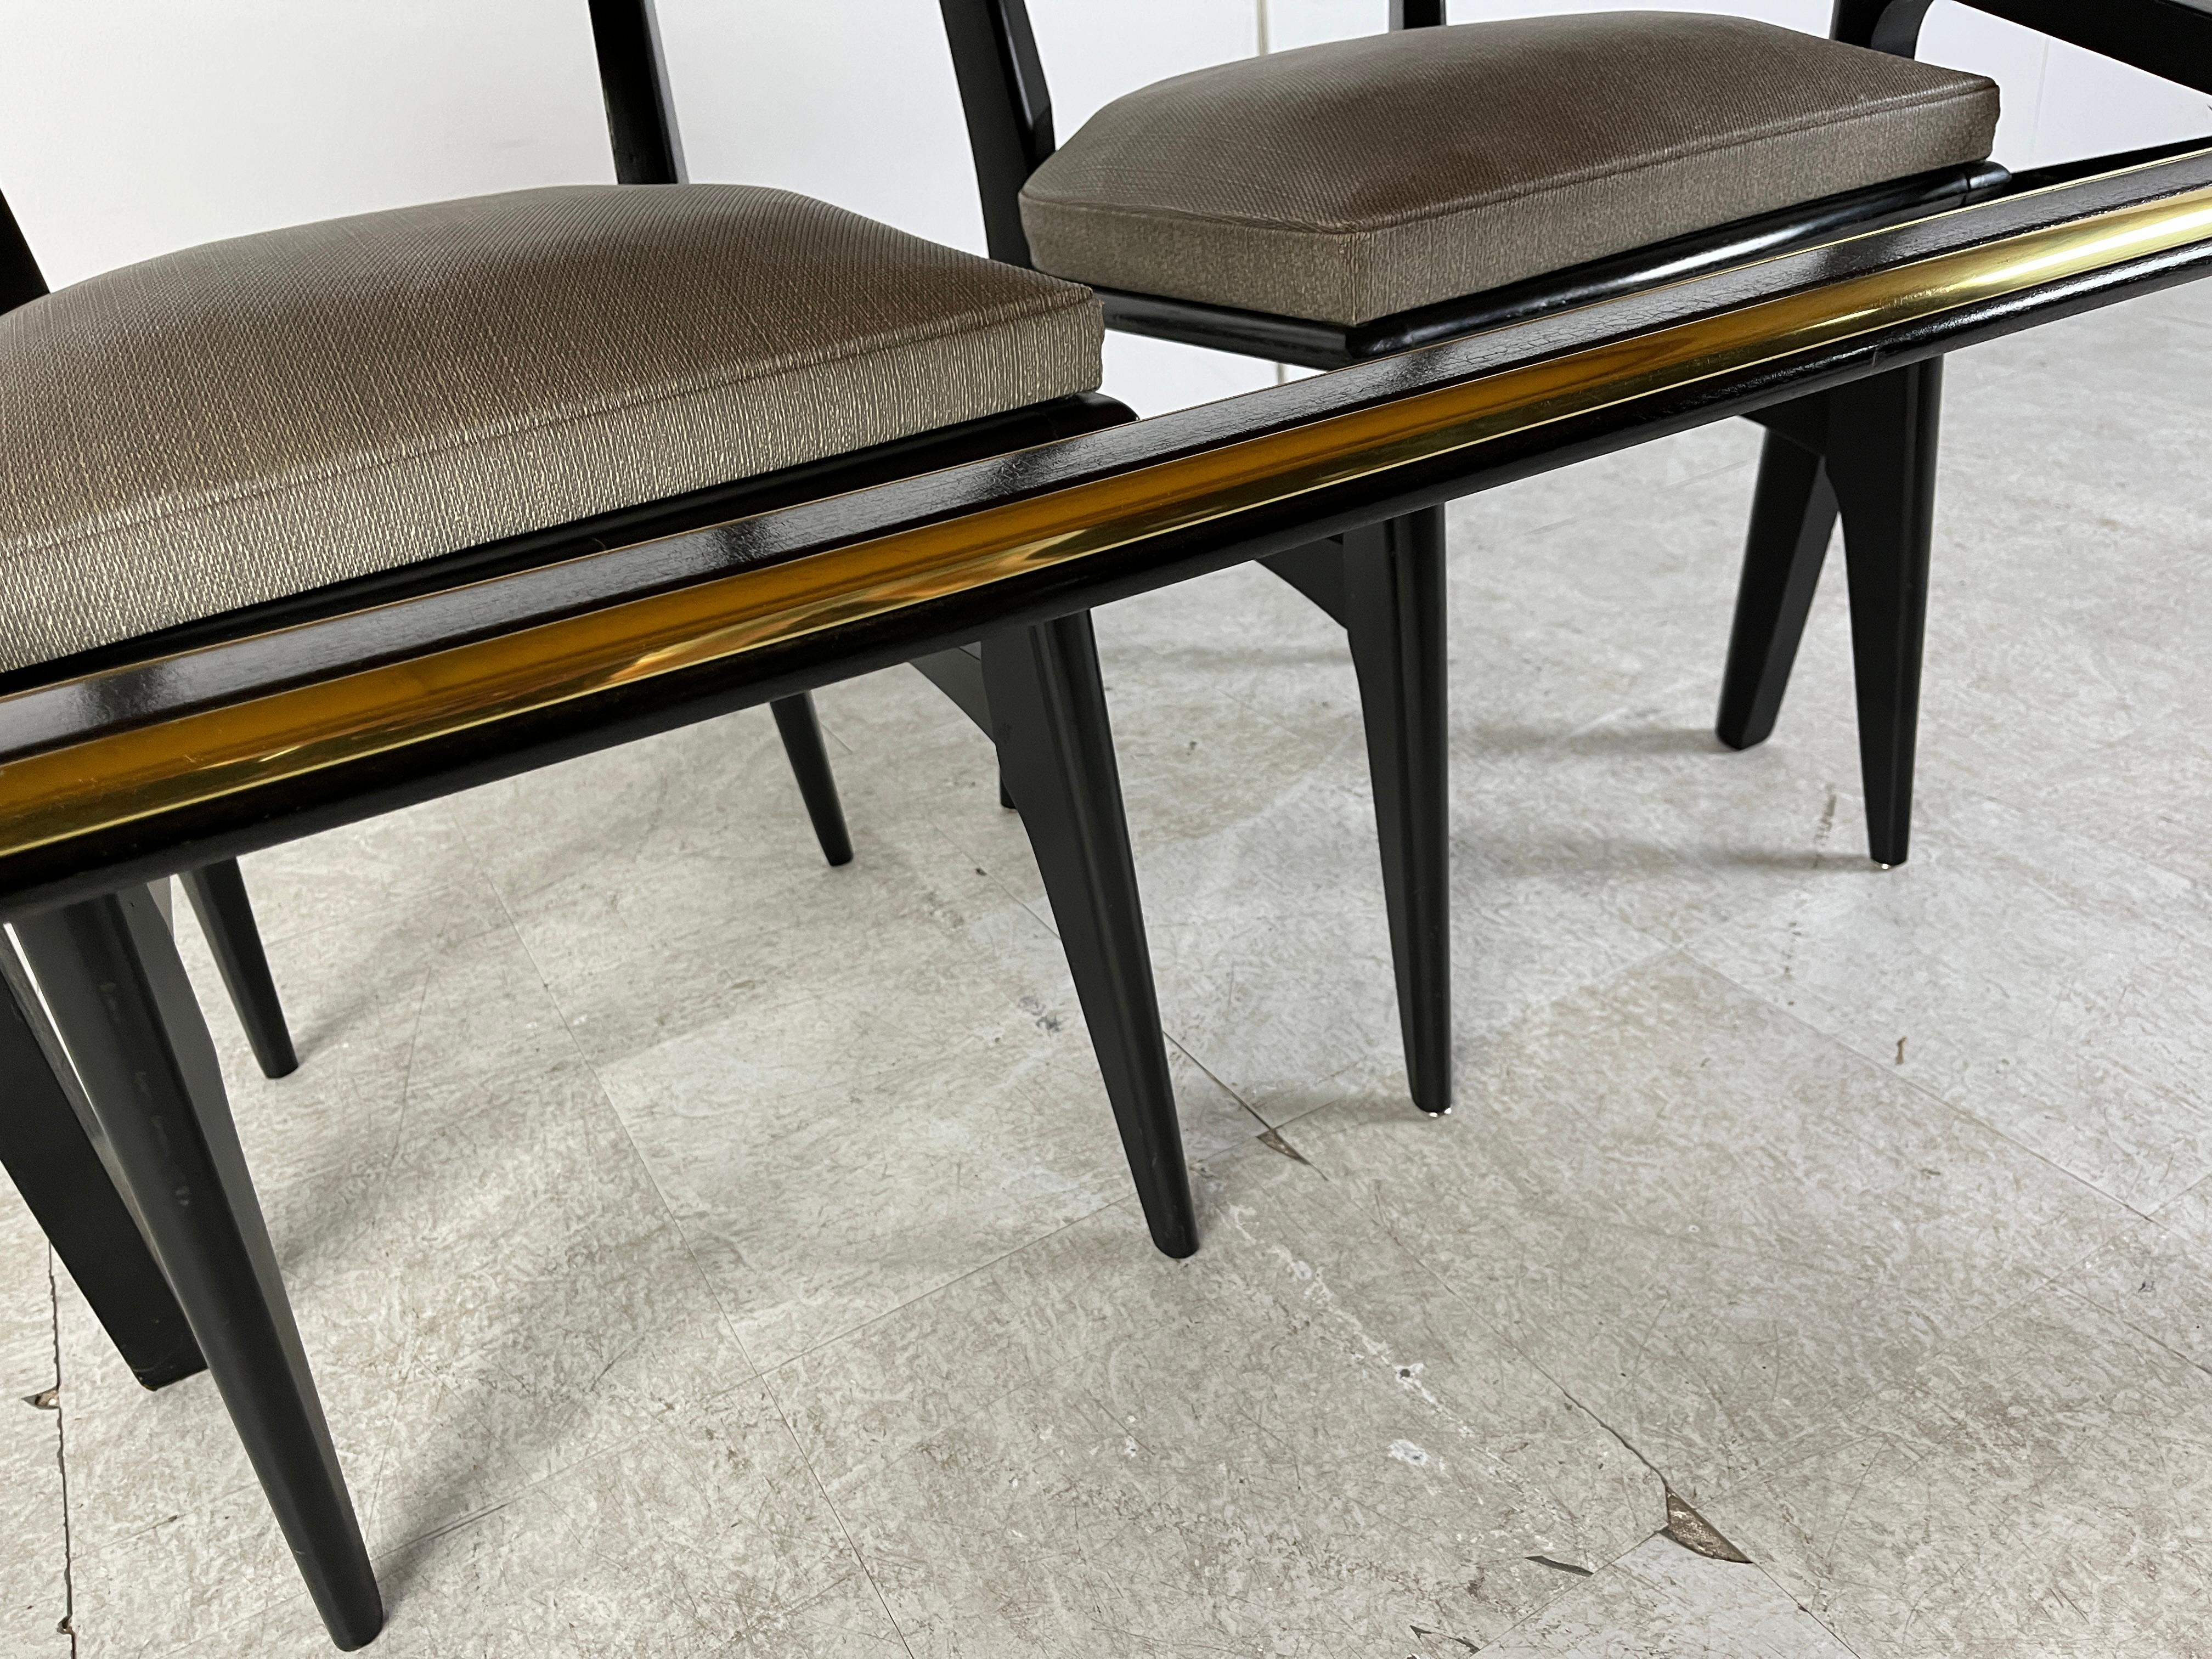 Elegant italian mid century dining set consisting of an extendable wooden dining table and 6 black ebonized wooden dining chairs with vinyl upholstery.

The dining table has two extractable table tops and a black ebonized wooden base with